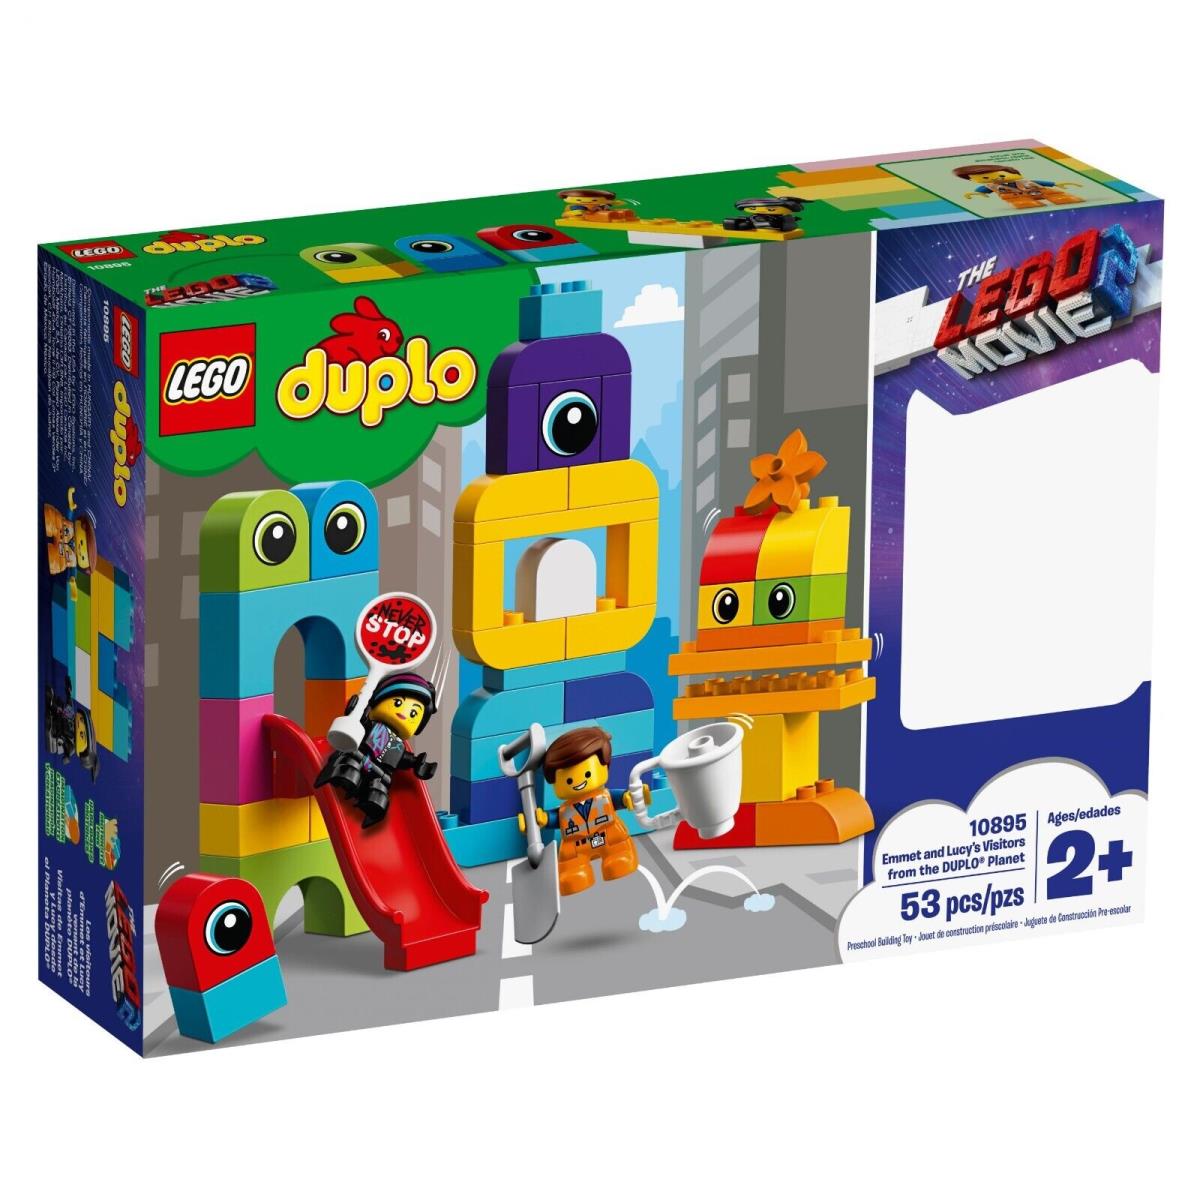 Lego 10895 Duplo Visitors From The Duplo Planet Retired Box